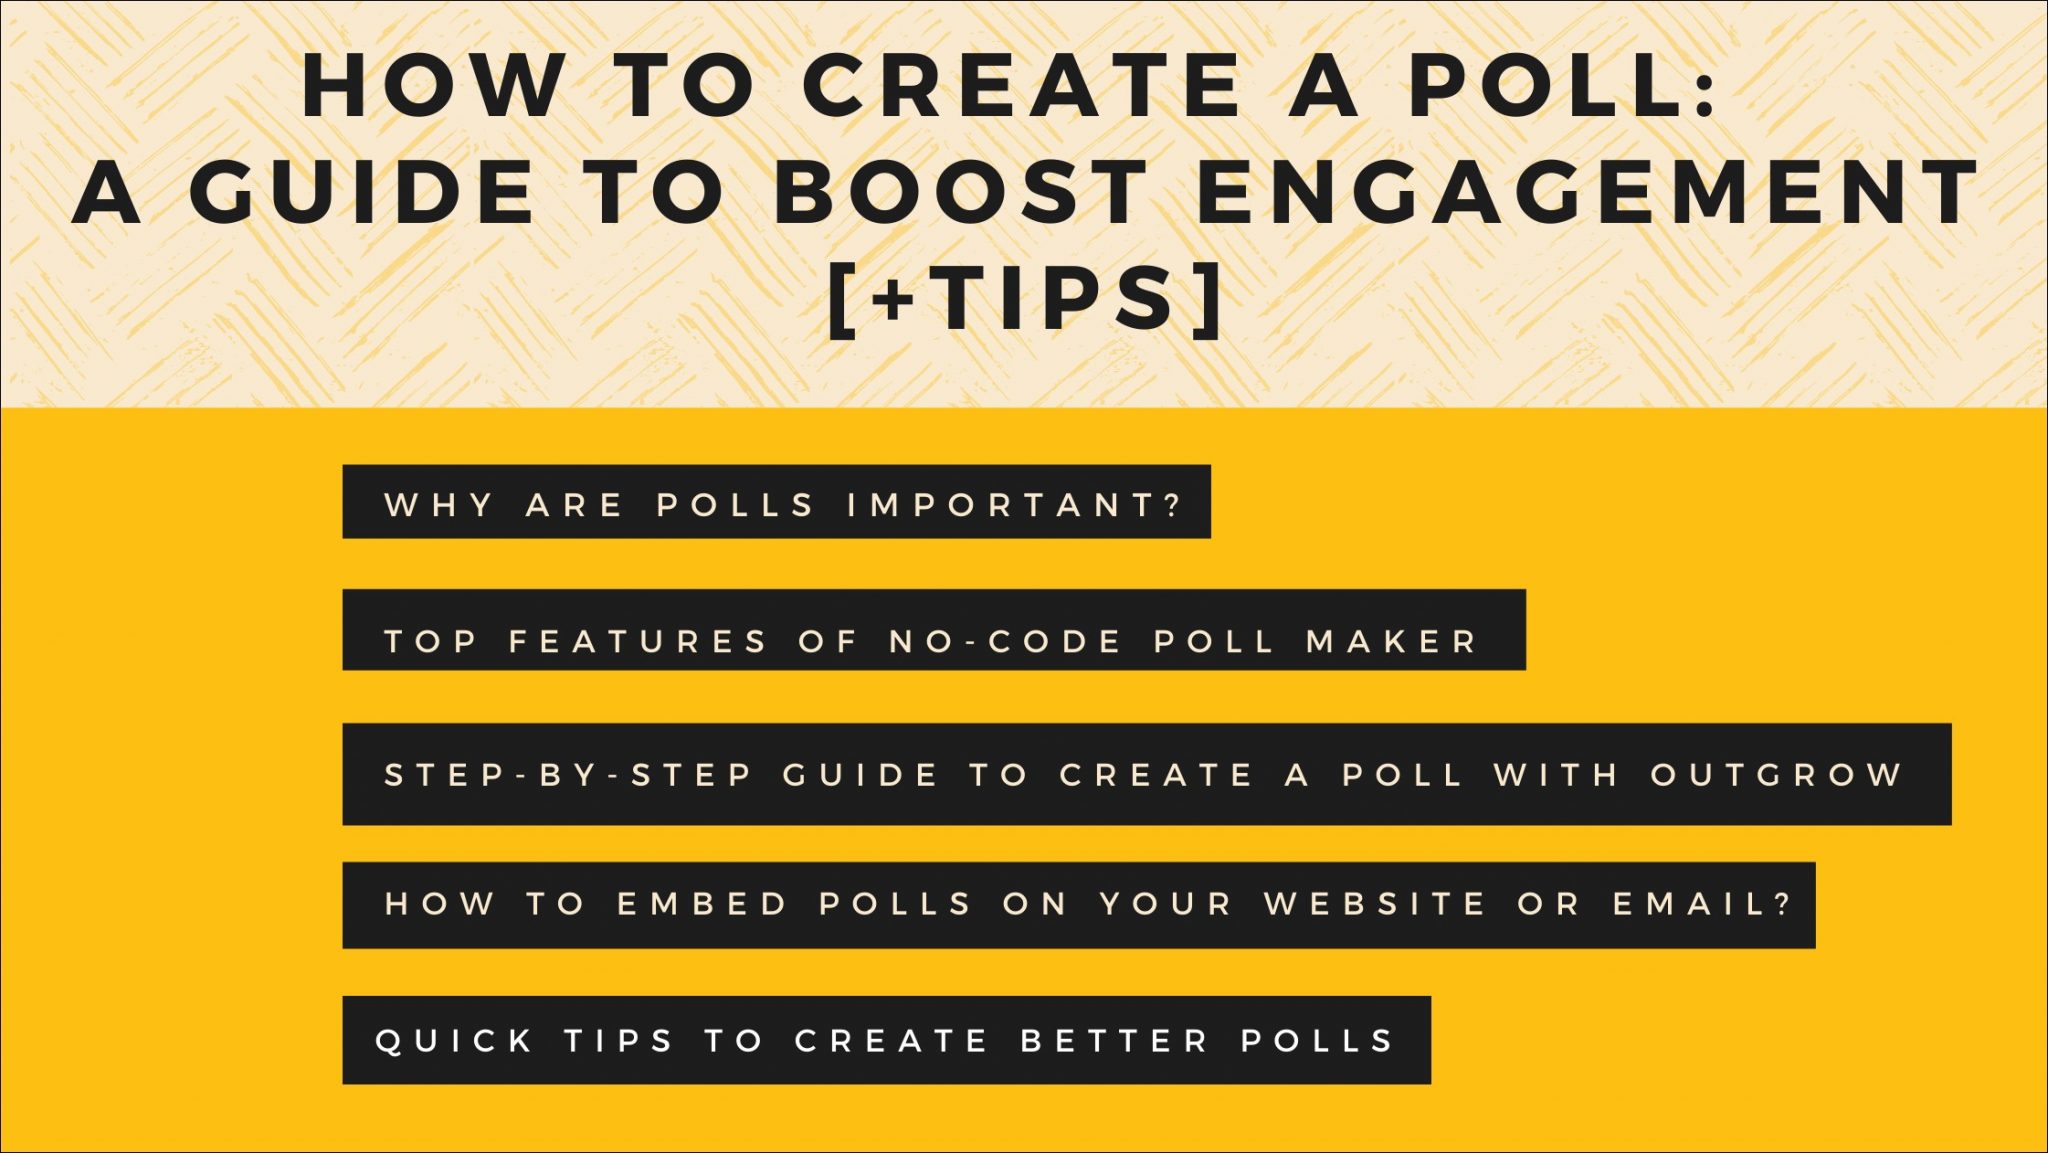 How to Create a Poll A Guide to Boost Engagement [+Tips]